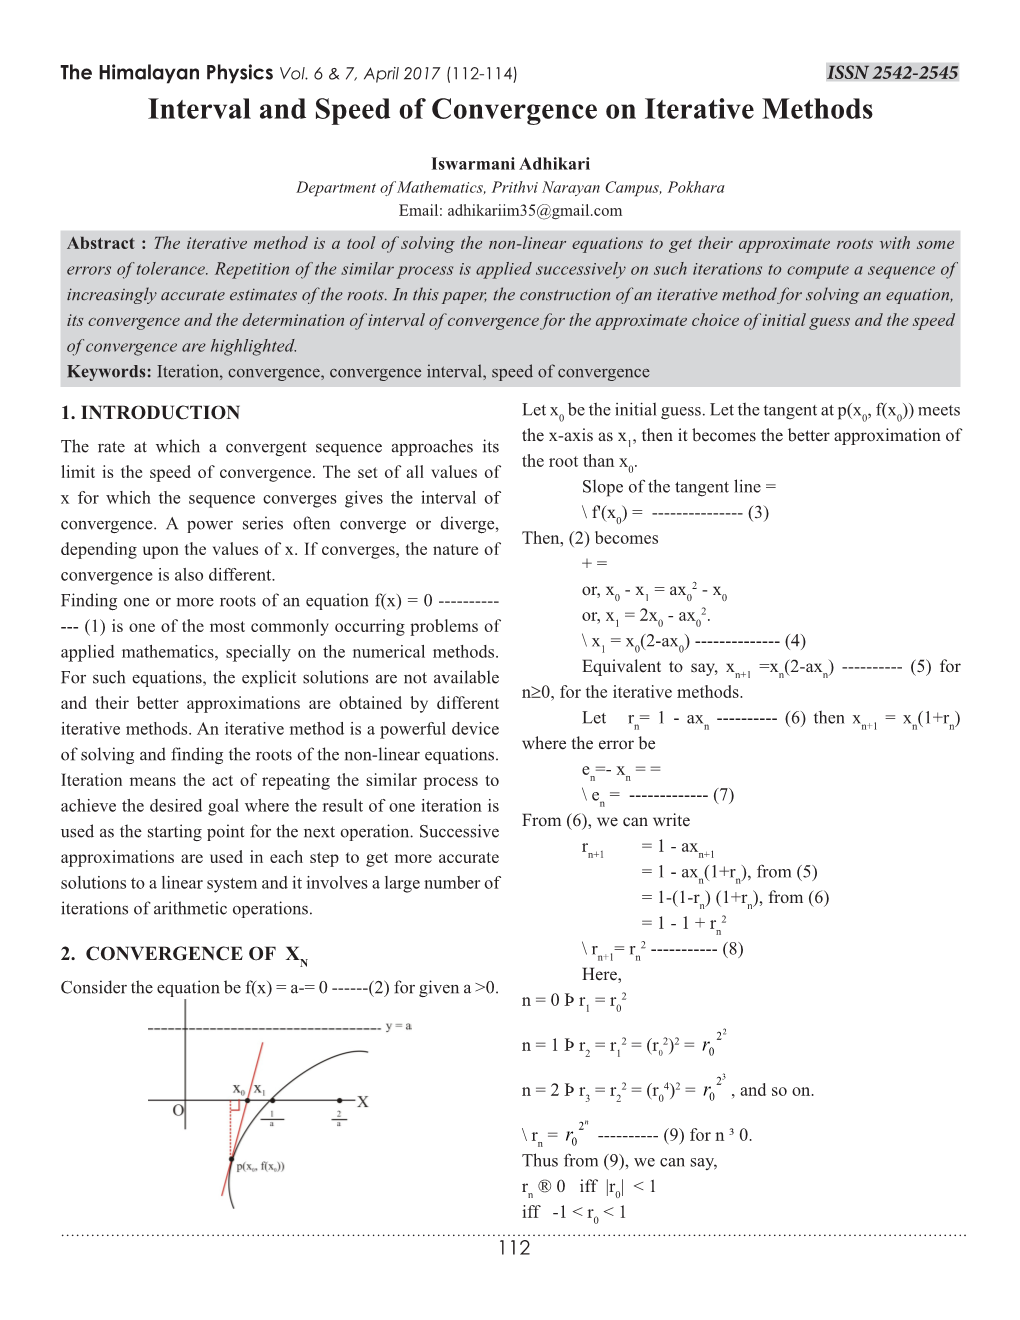 Interval and Speed of Convergence on Iterative Methods